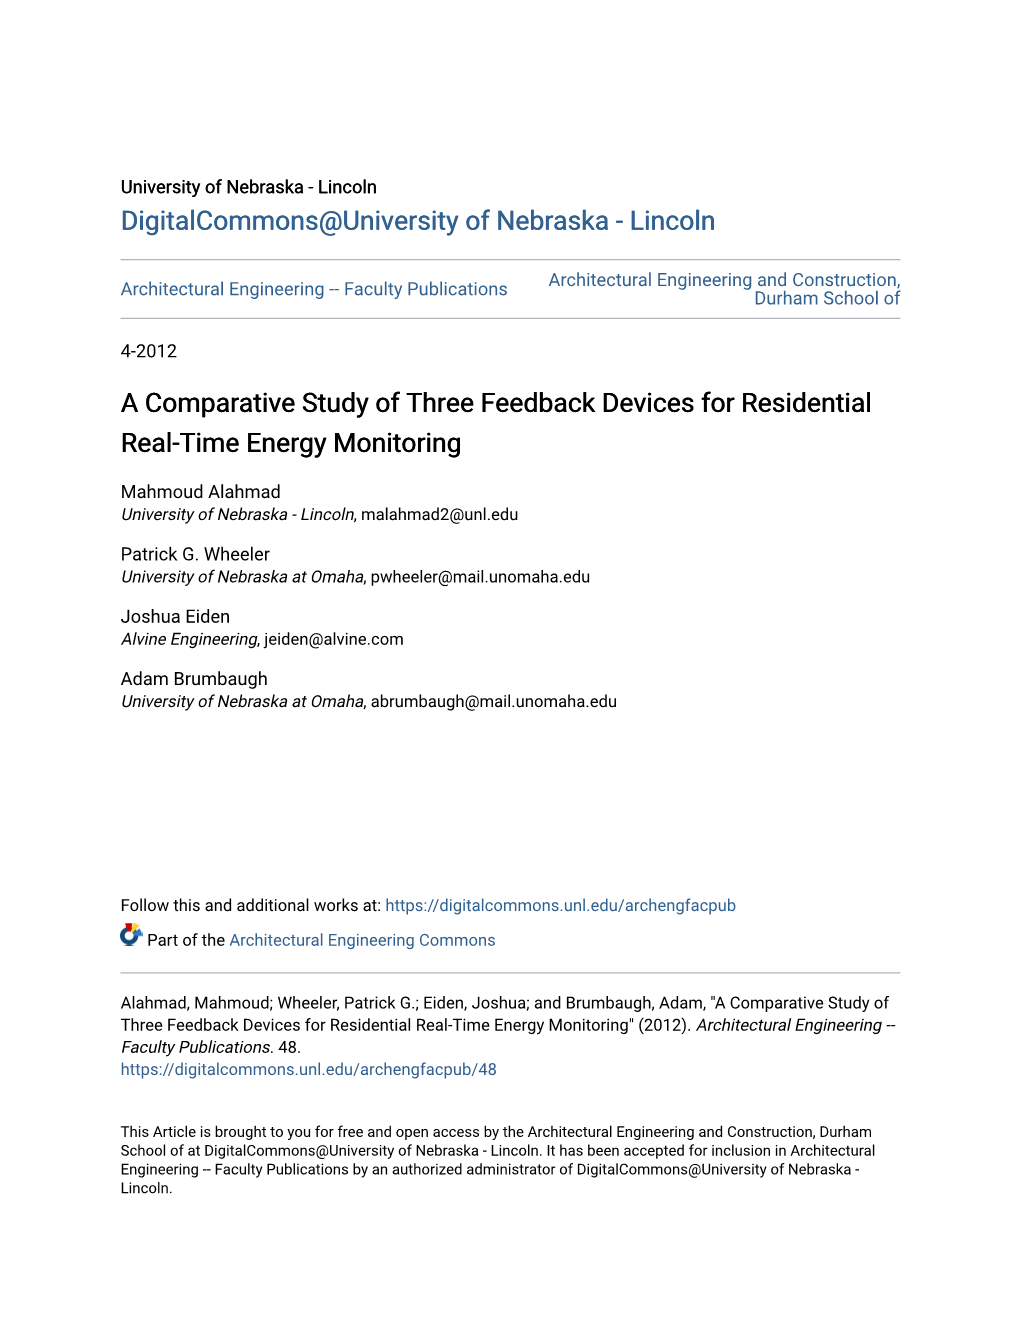 A Comparative Study of Three Feedback Devices for Residential Real-Time Energy Monitoring